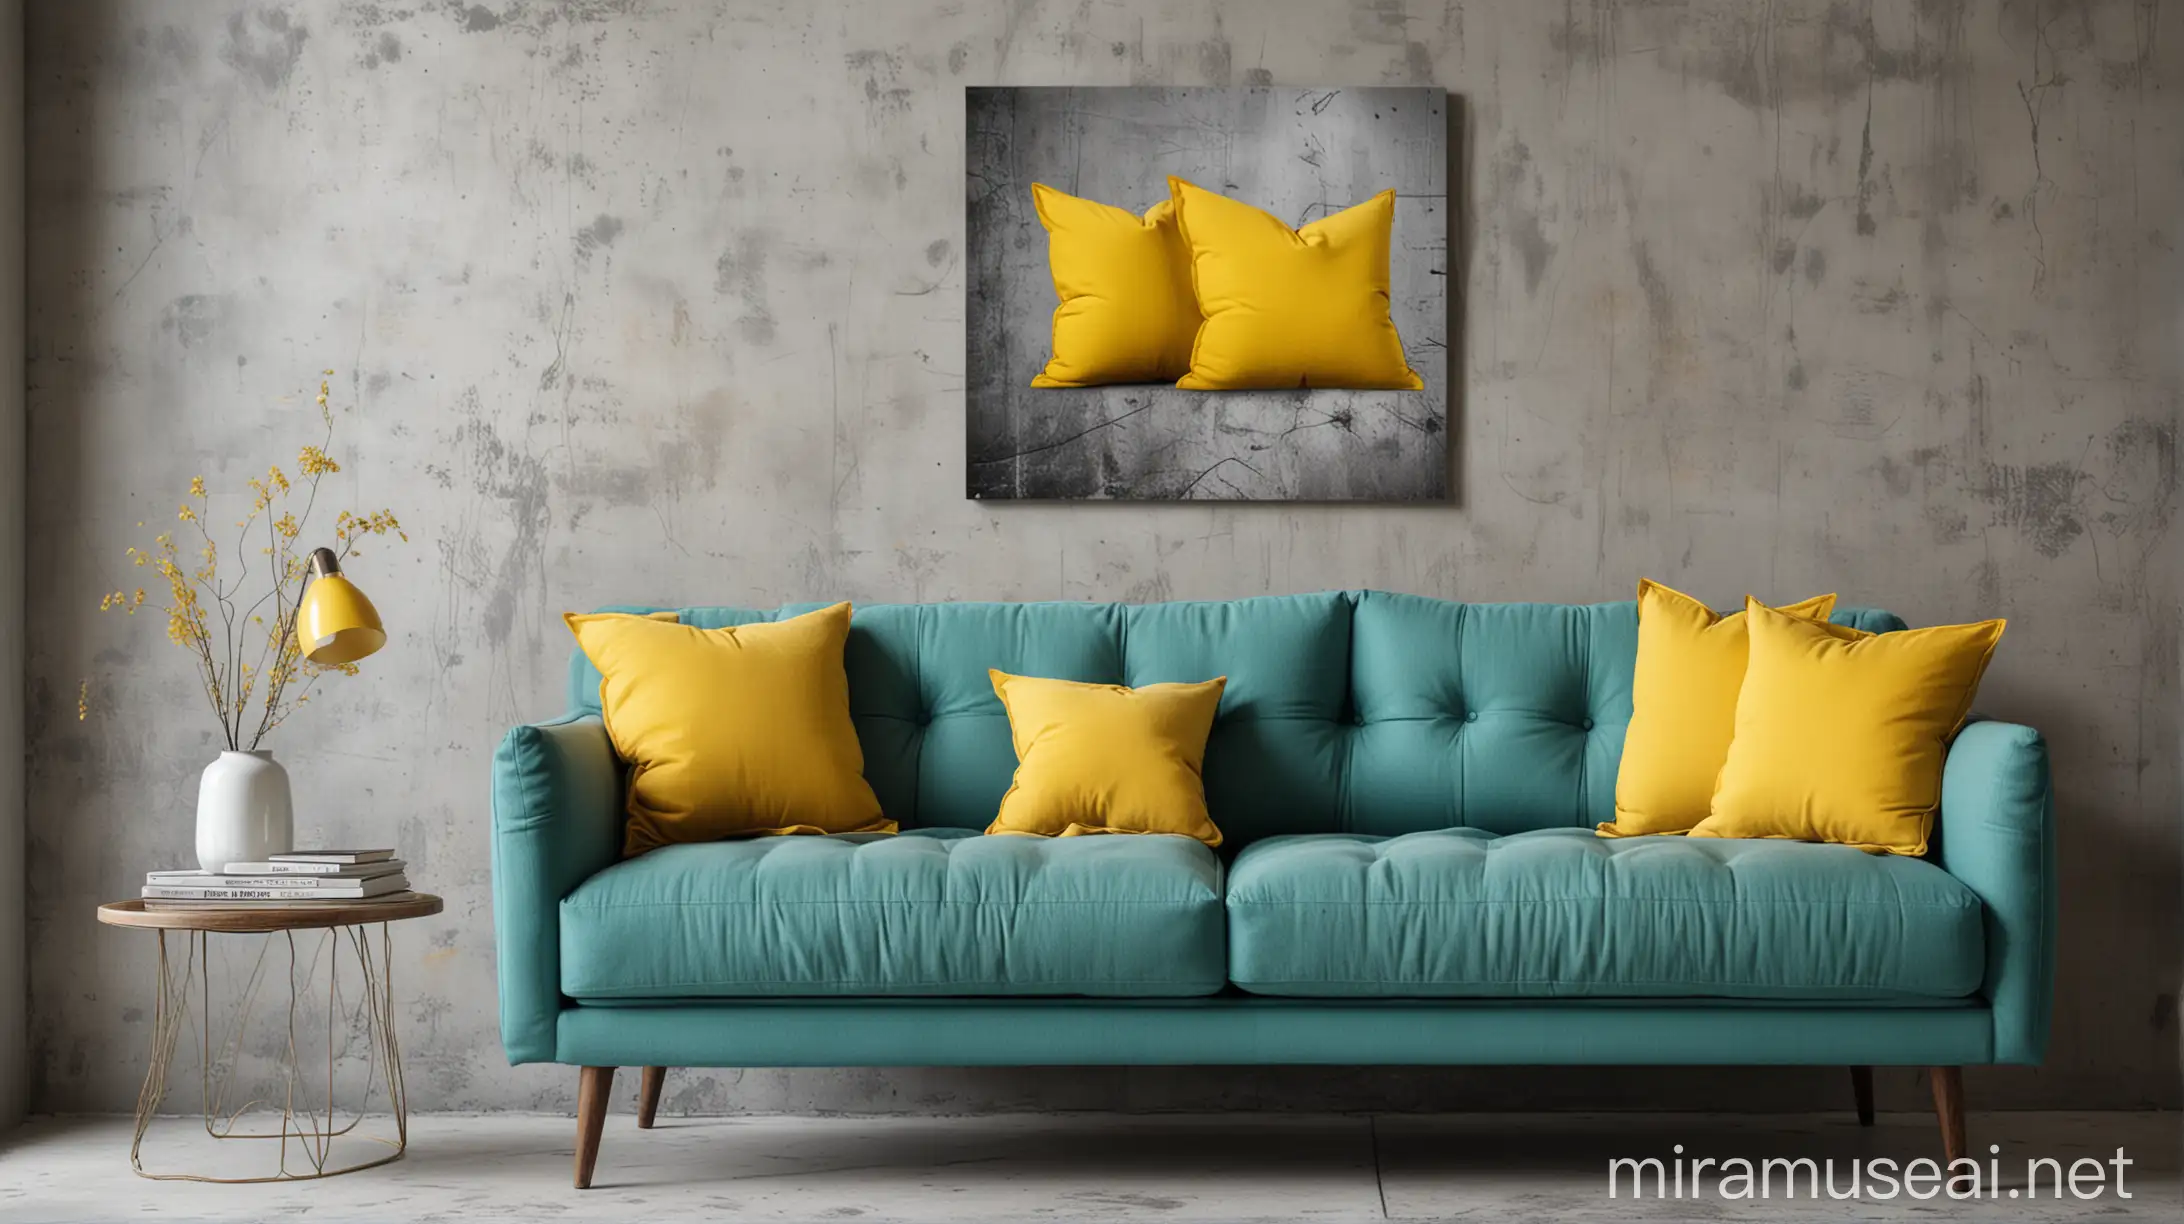 Vibrant Teal Sofa with Yellow Pillows Against Grey Stucco Wall Modern Living Room Decor